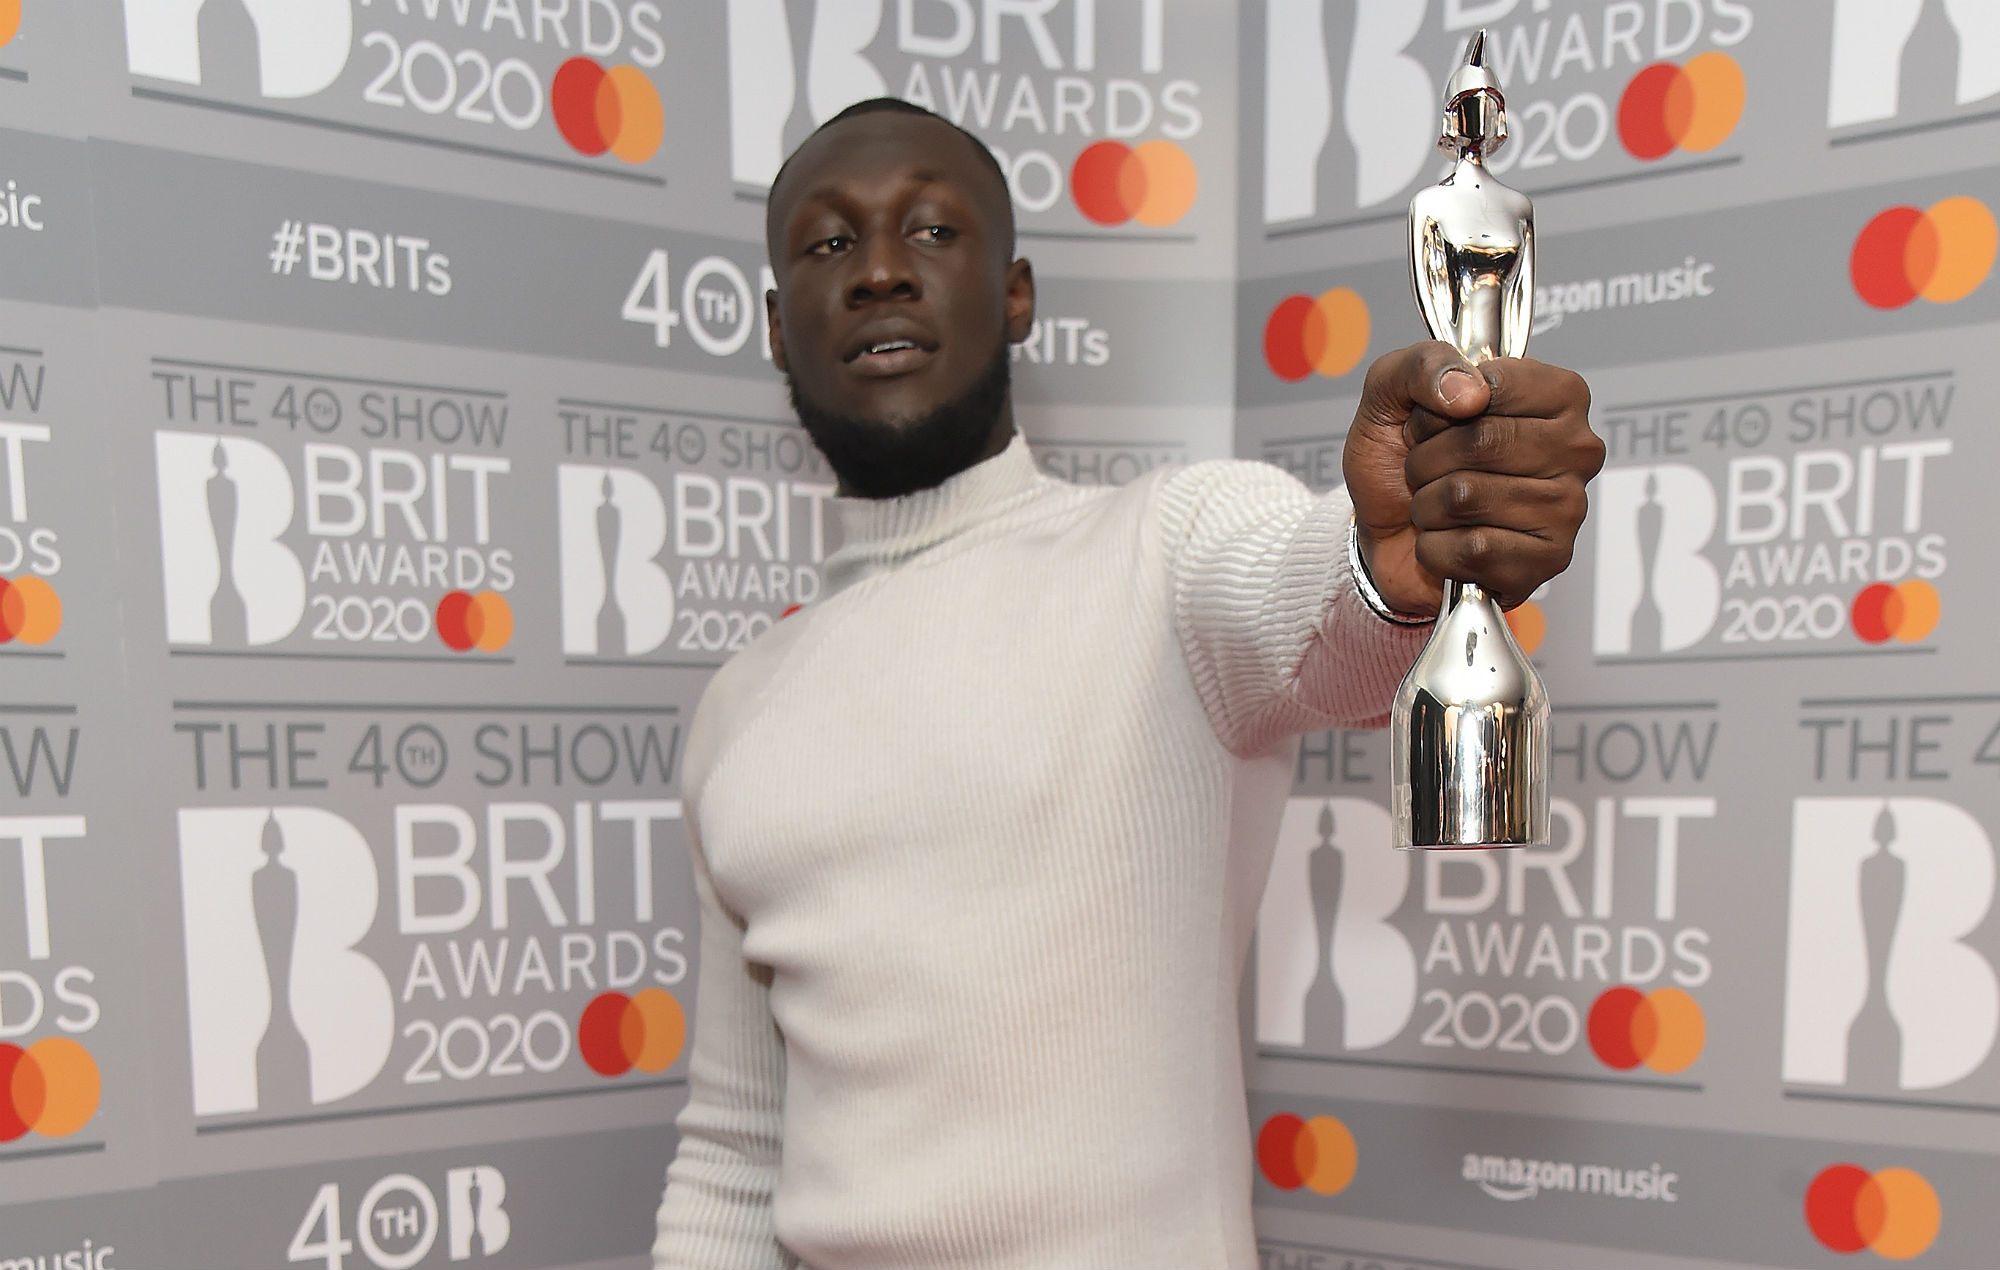 GettyImages-1201730571_stormzy_brit_awards_2020_2000